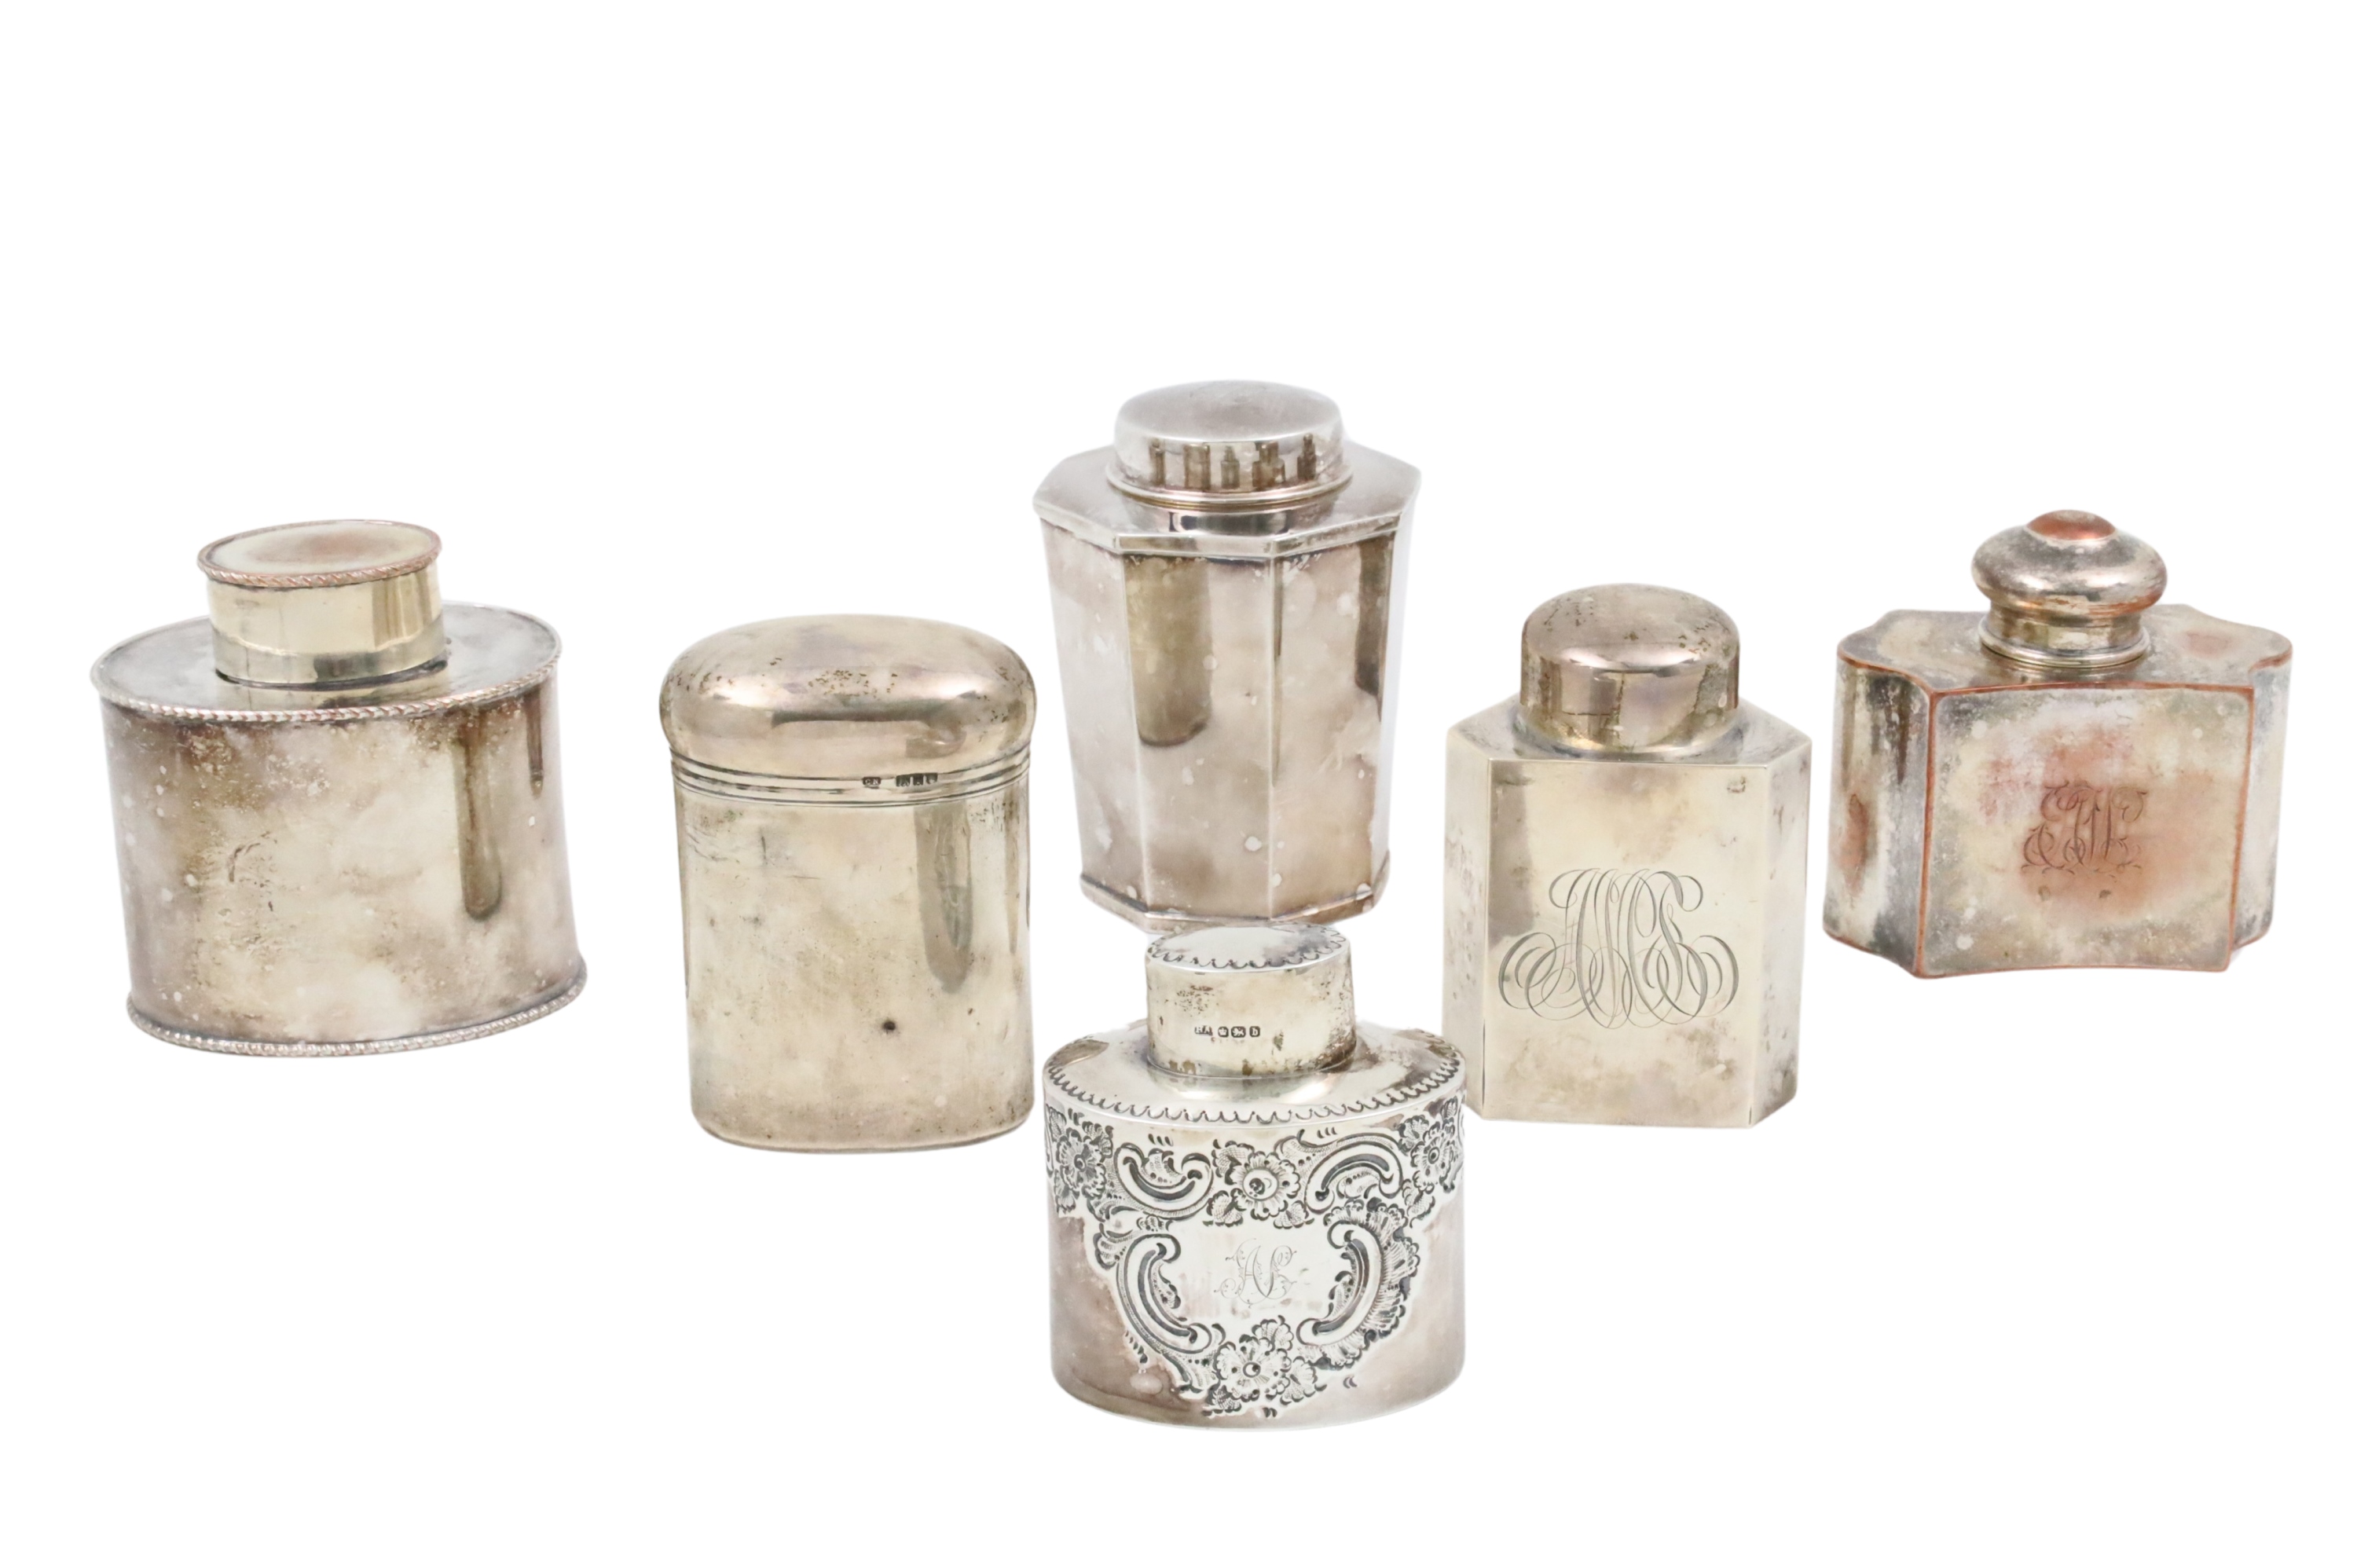 COLLECTION OF 6 SILVER TEA CADDIES